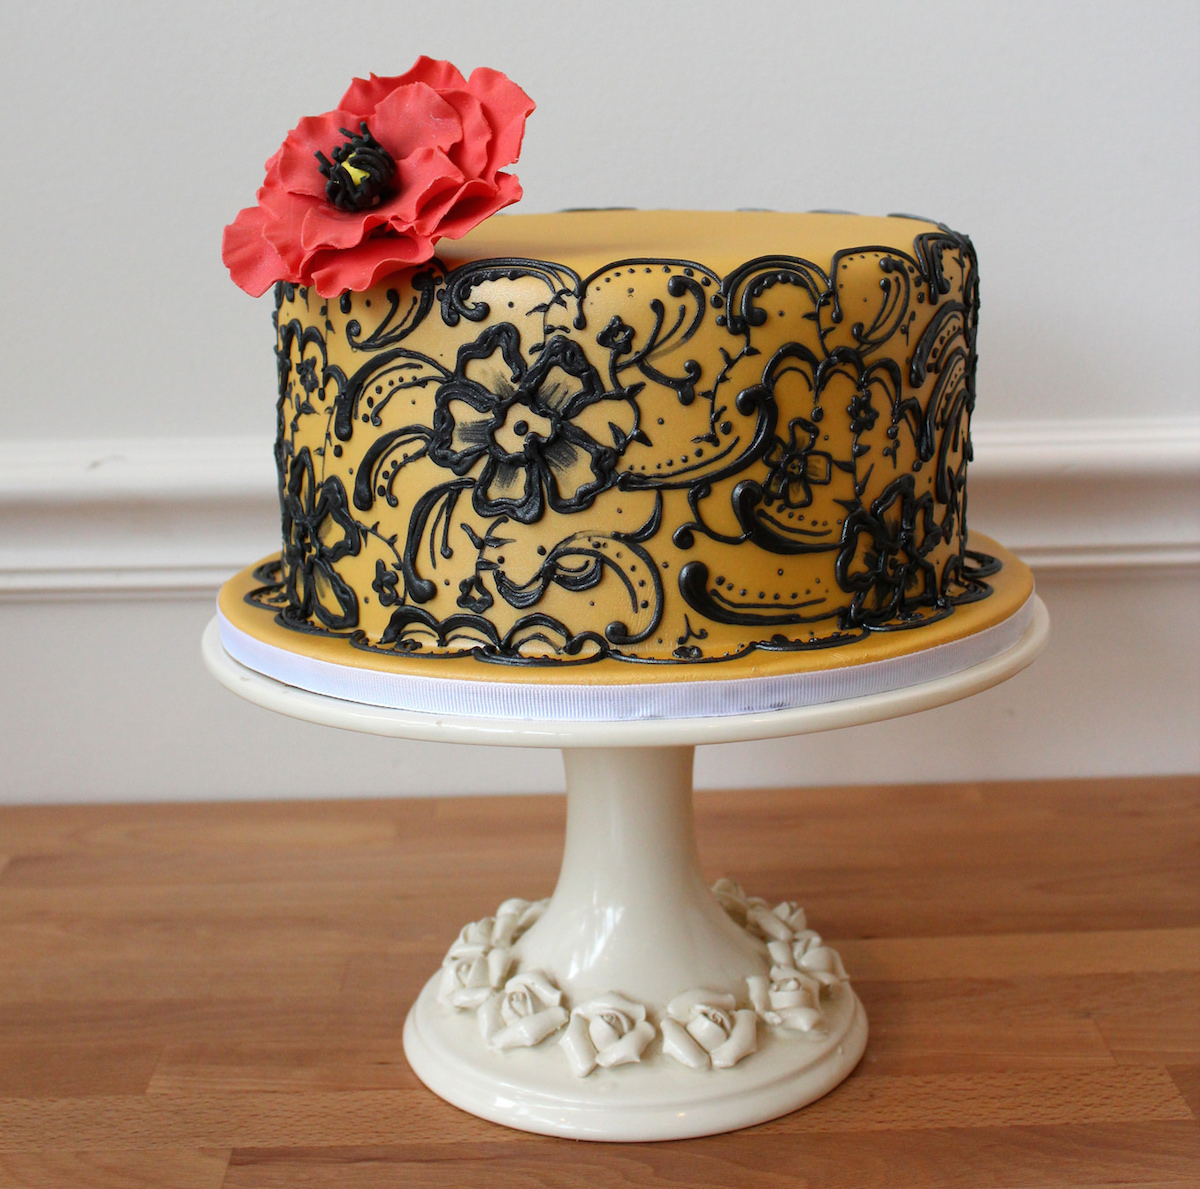 black lace design drawn freehand using a piping bag of royal icing over of a fondant cake/Photo courtesy of Oakleaf Cakes